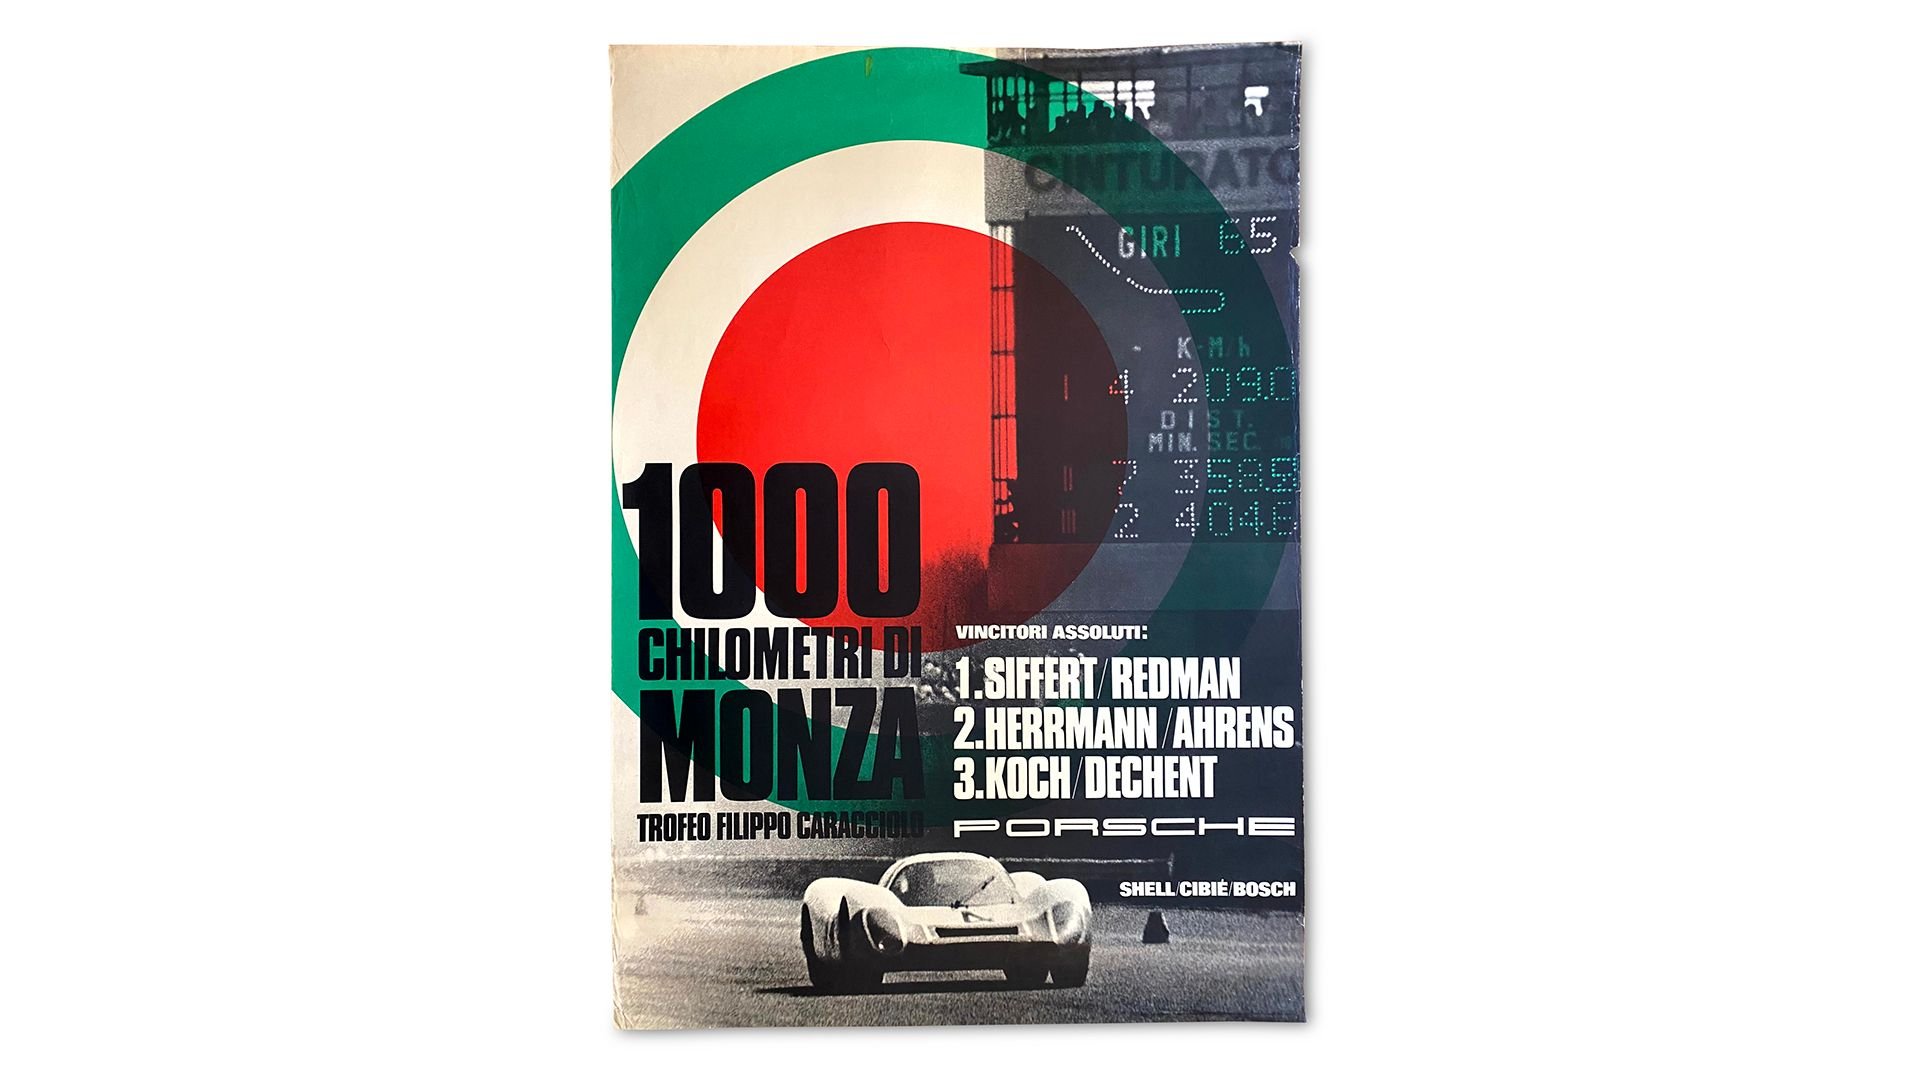 For Sale Group of 11 Porsche Sports Racing Prototype (907, 908, 908/2, 908/3) Factory Racing Posters 1968-1970